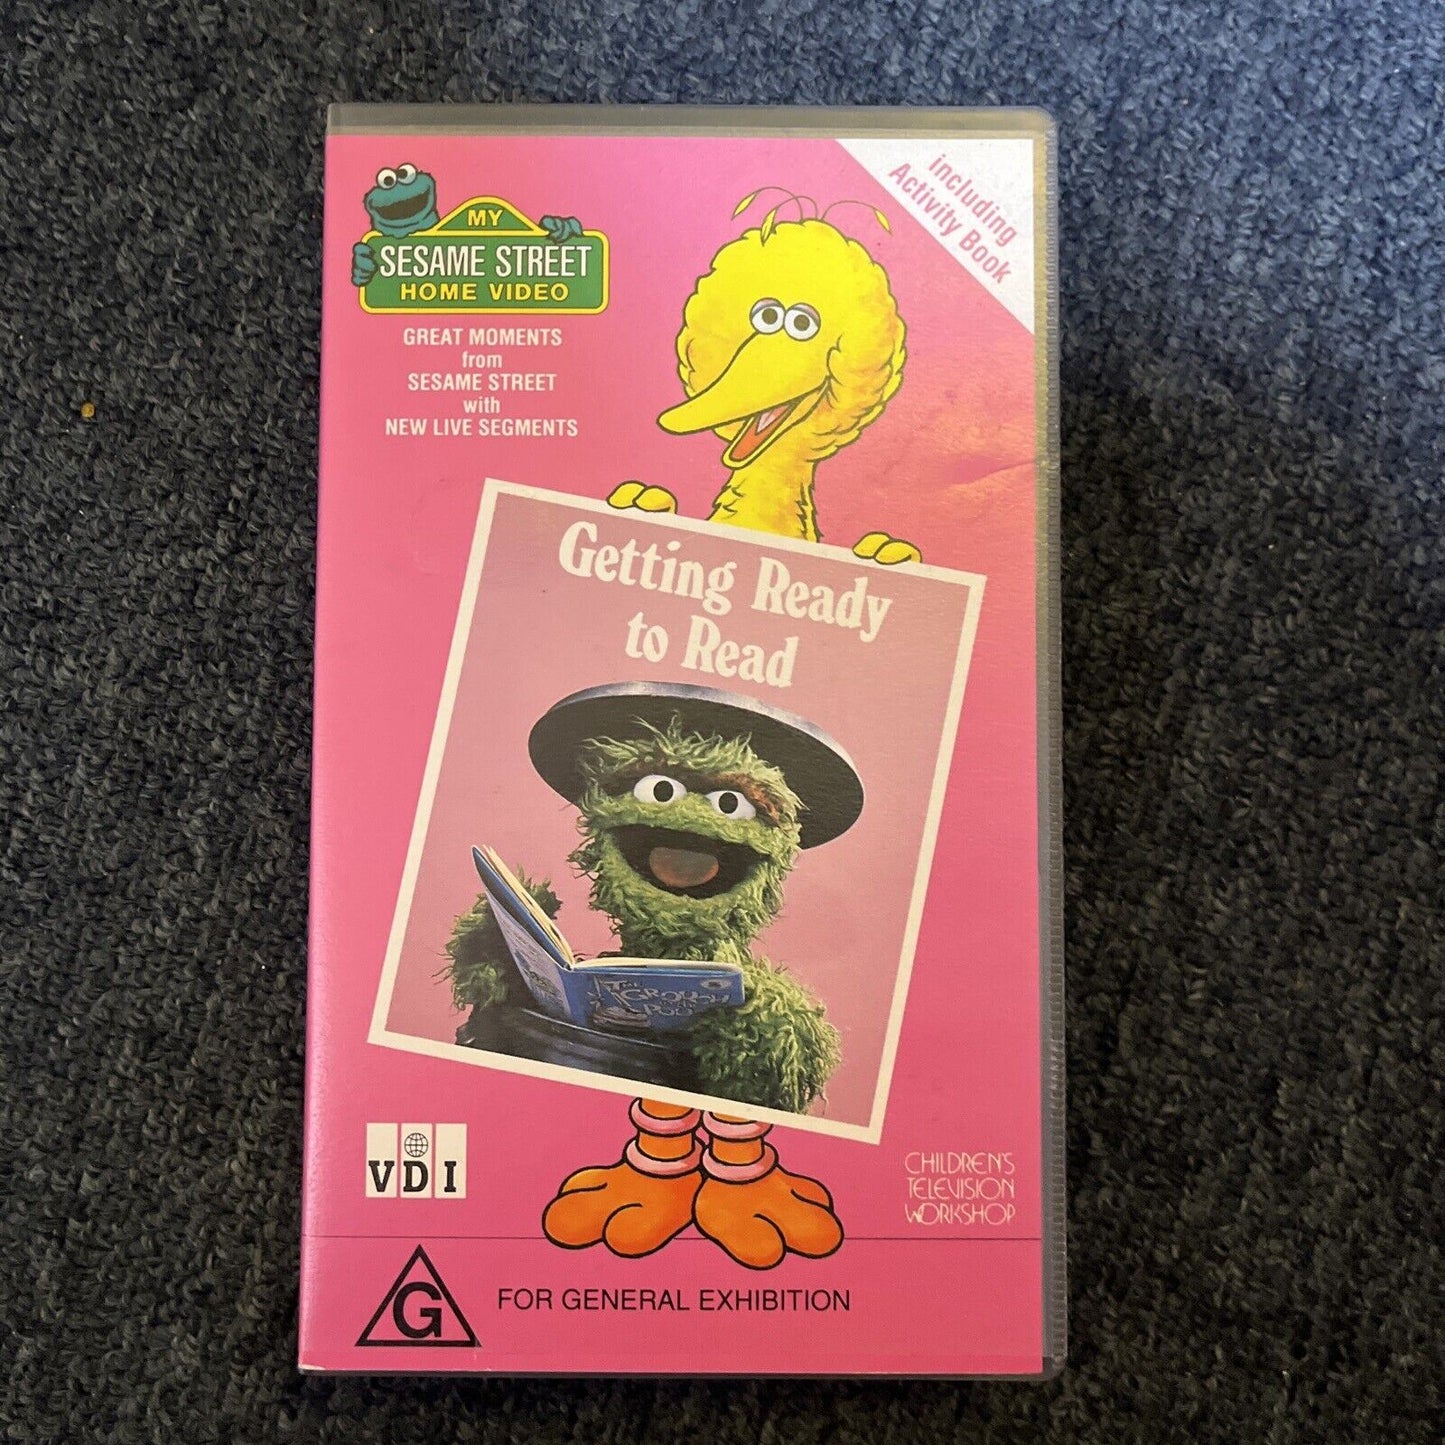 Sesame Street - Getting Ready to Read, Getting Ready For School (VHS, 1991) PAL